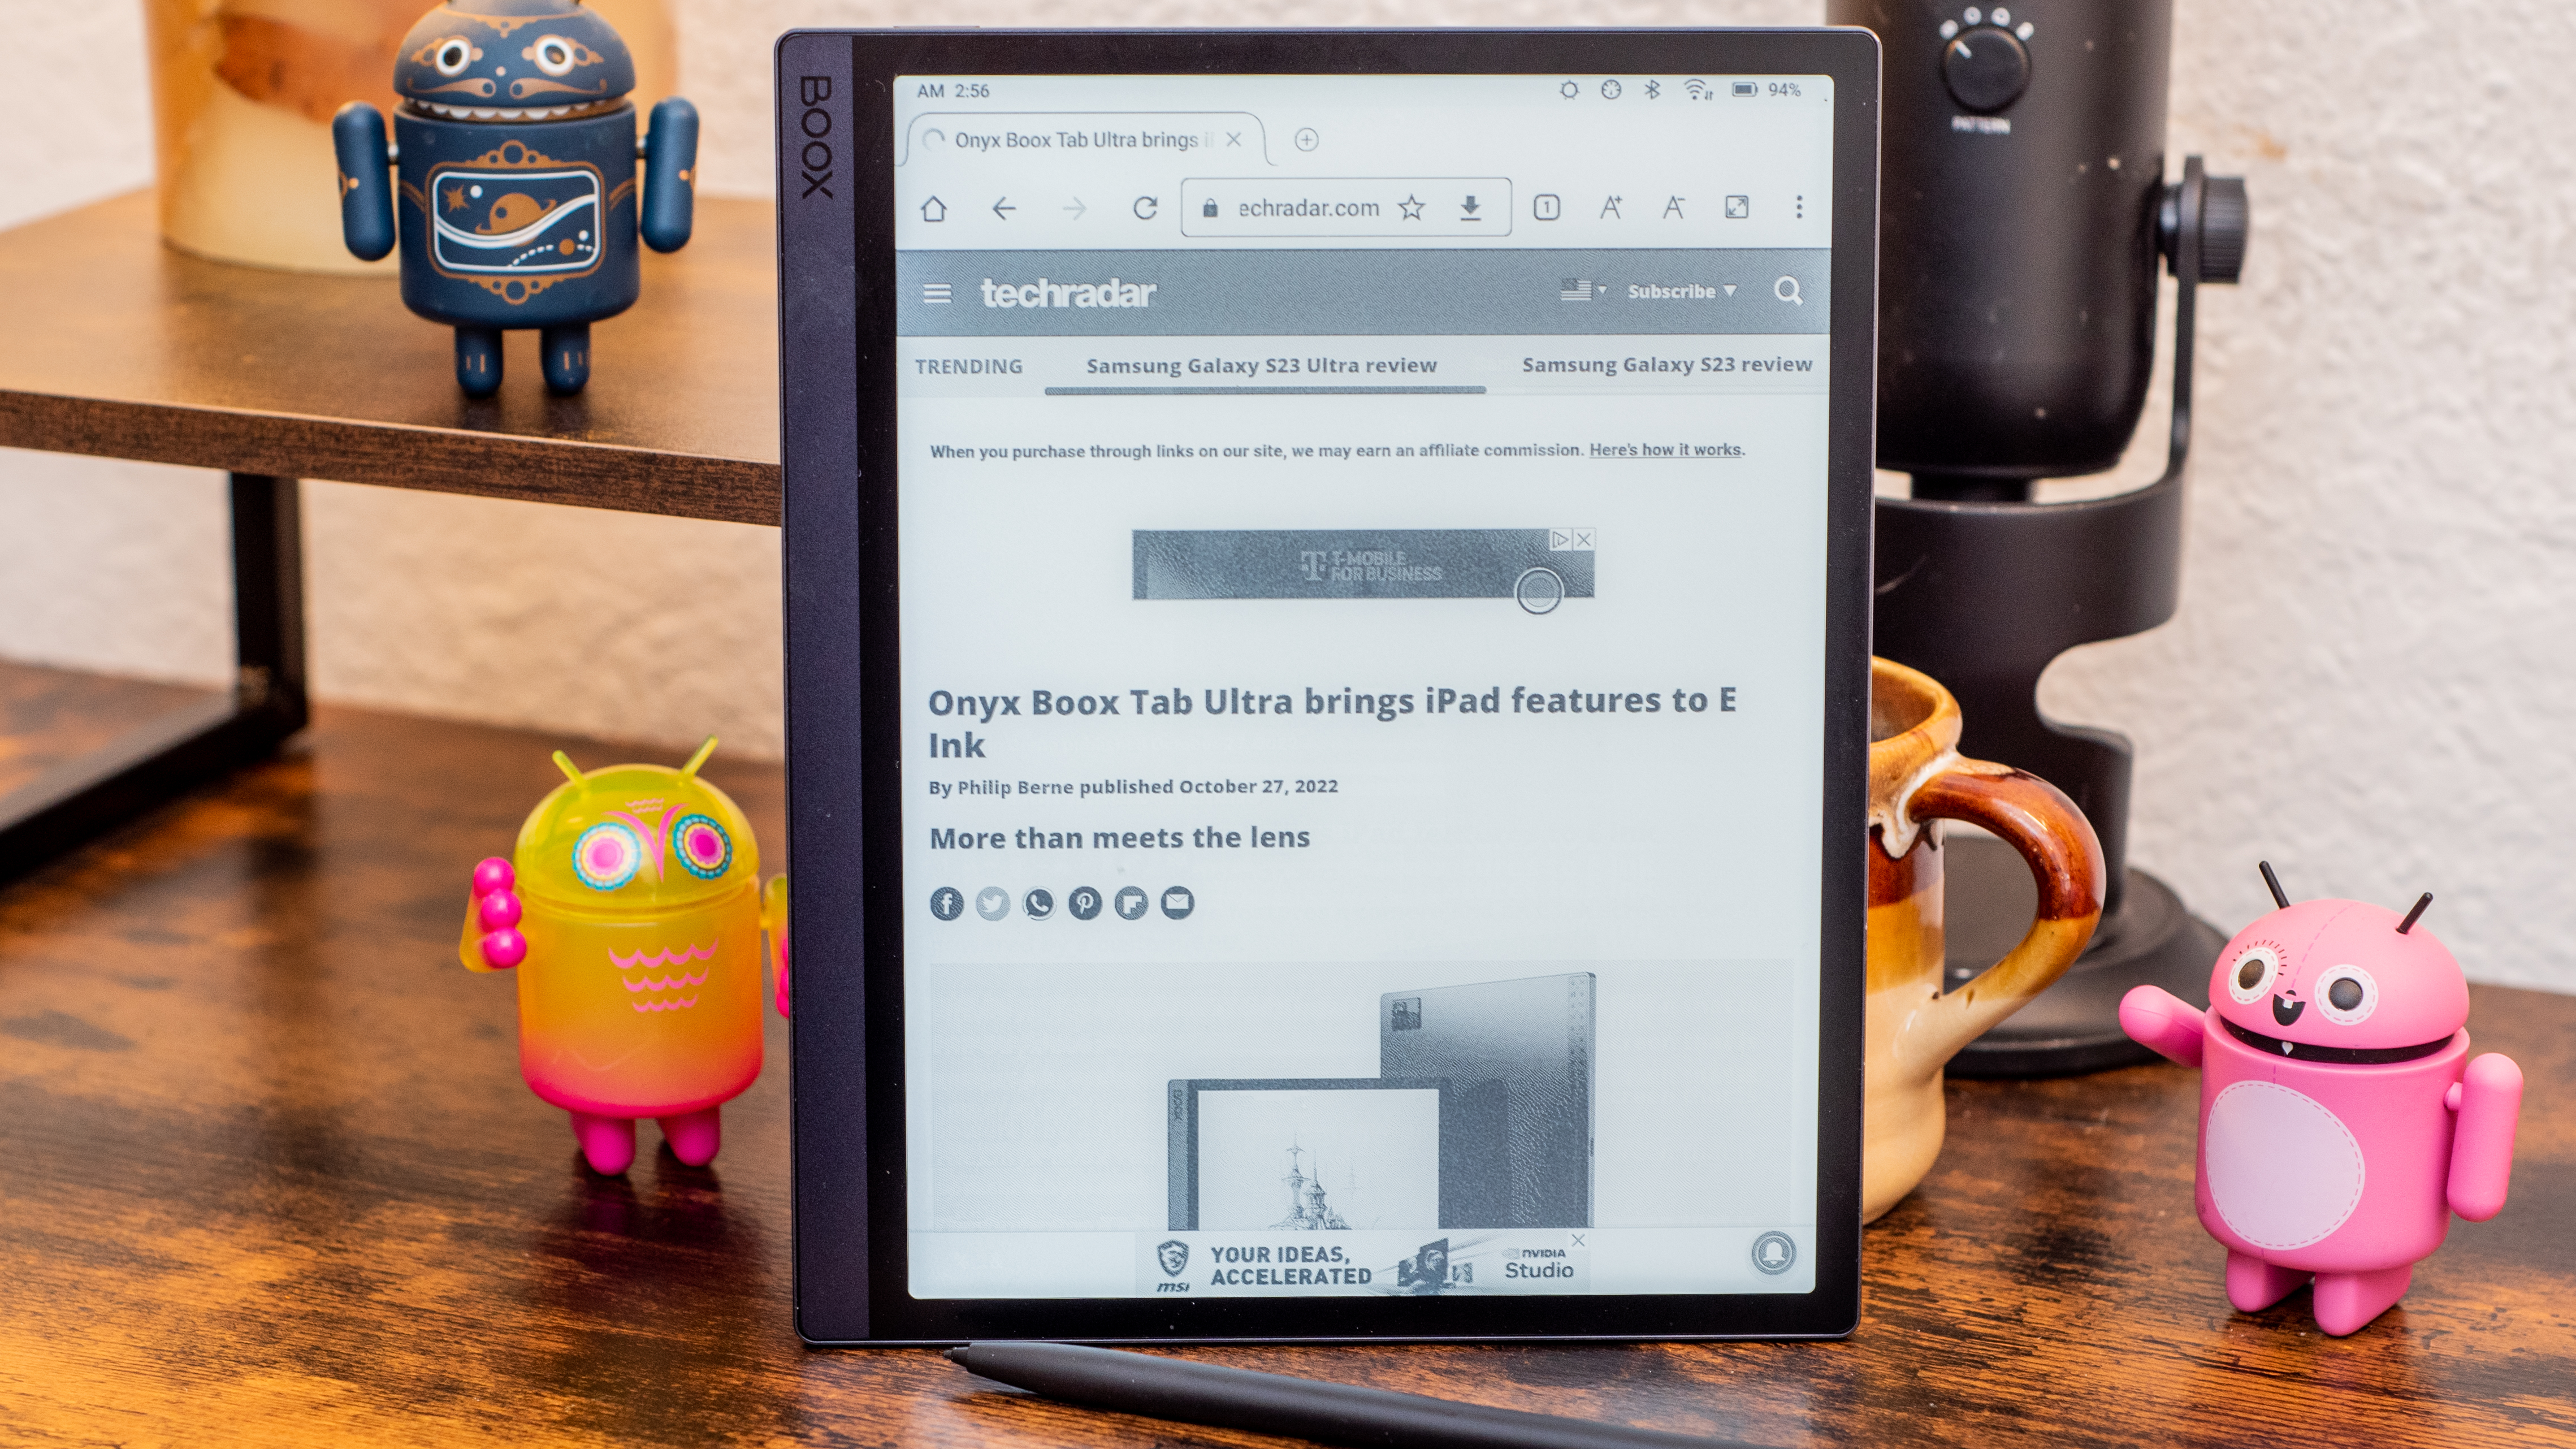 Onyx BOOX Tab Ultra C Pro is a faster 10.3 inch E Ink Color tablet